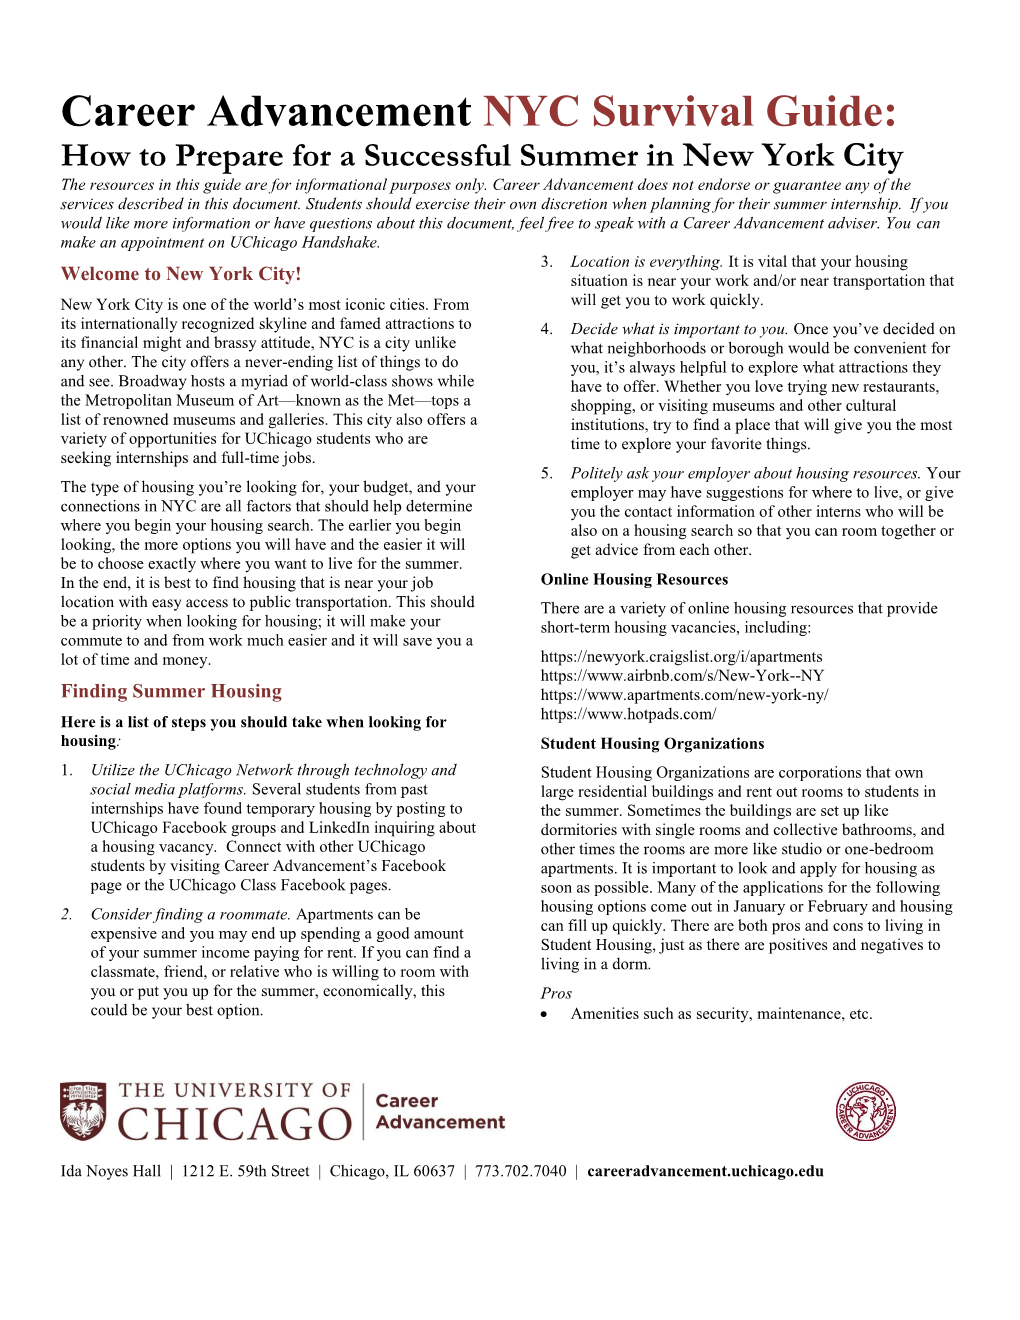 Career Advancement NYC Survival Guide: How to Prepare for a Successful Summer in New York City the Resources in This Guide Are for Informational Purposes Only